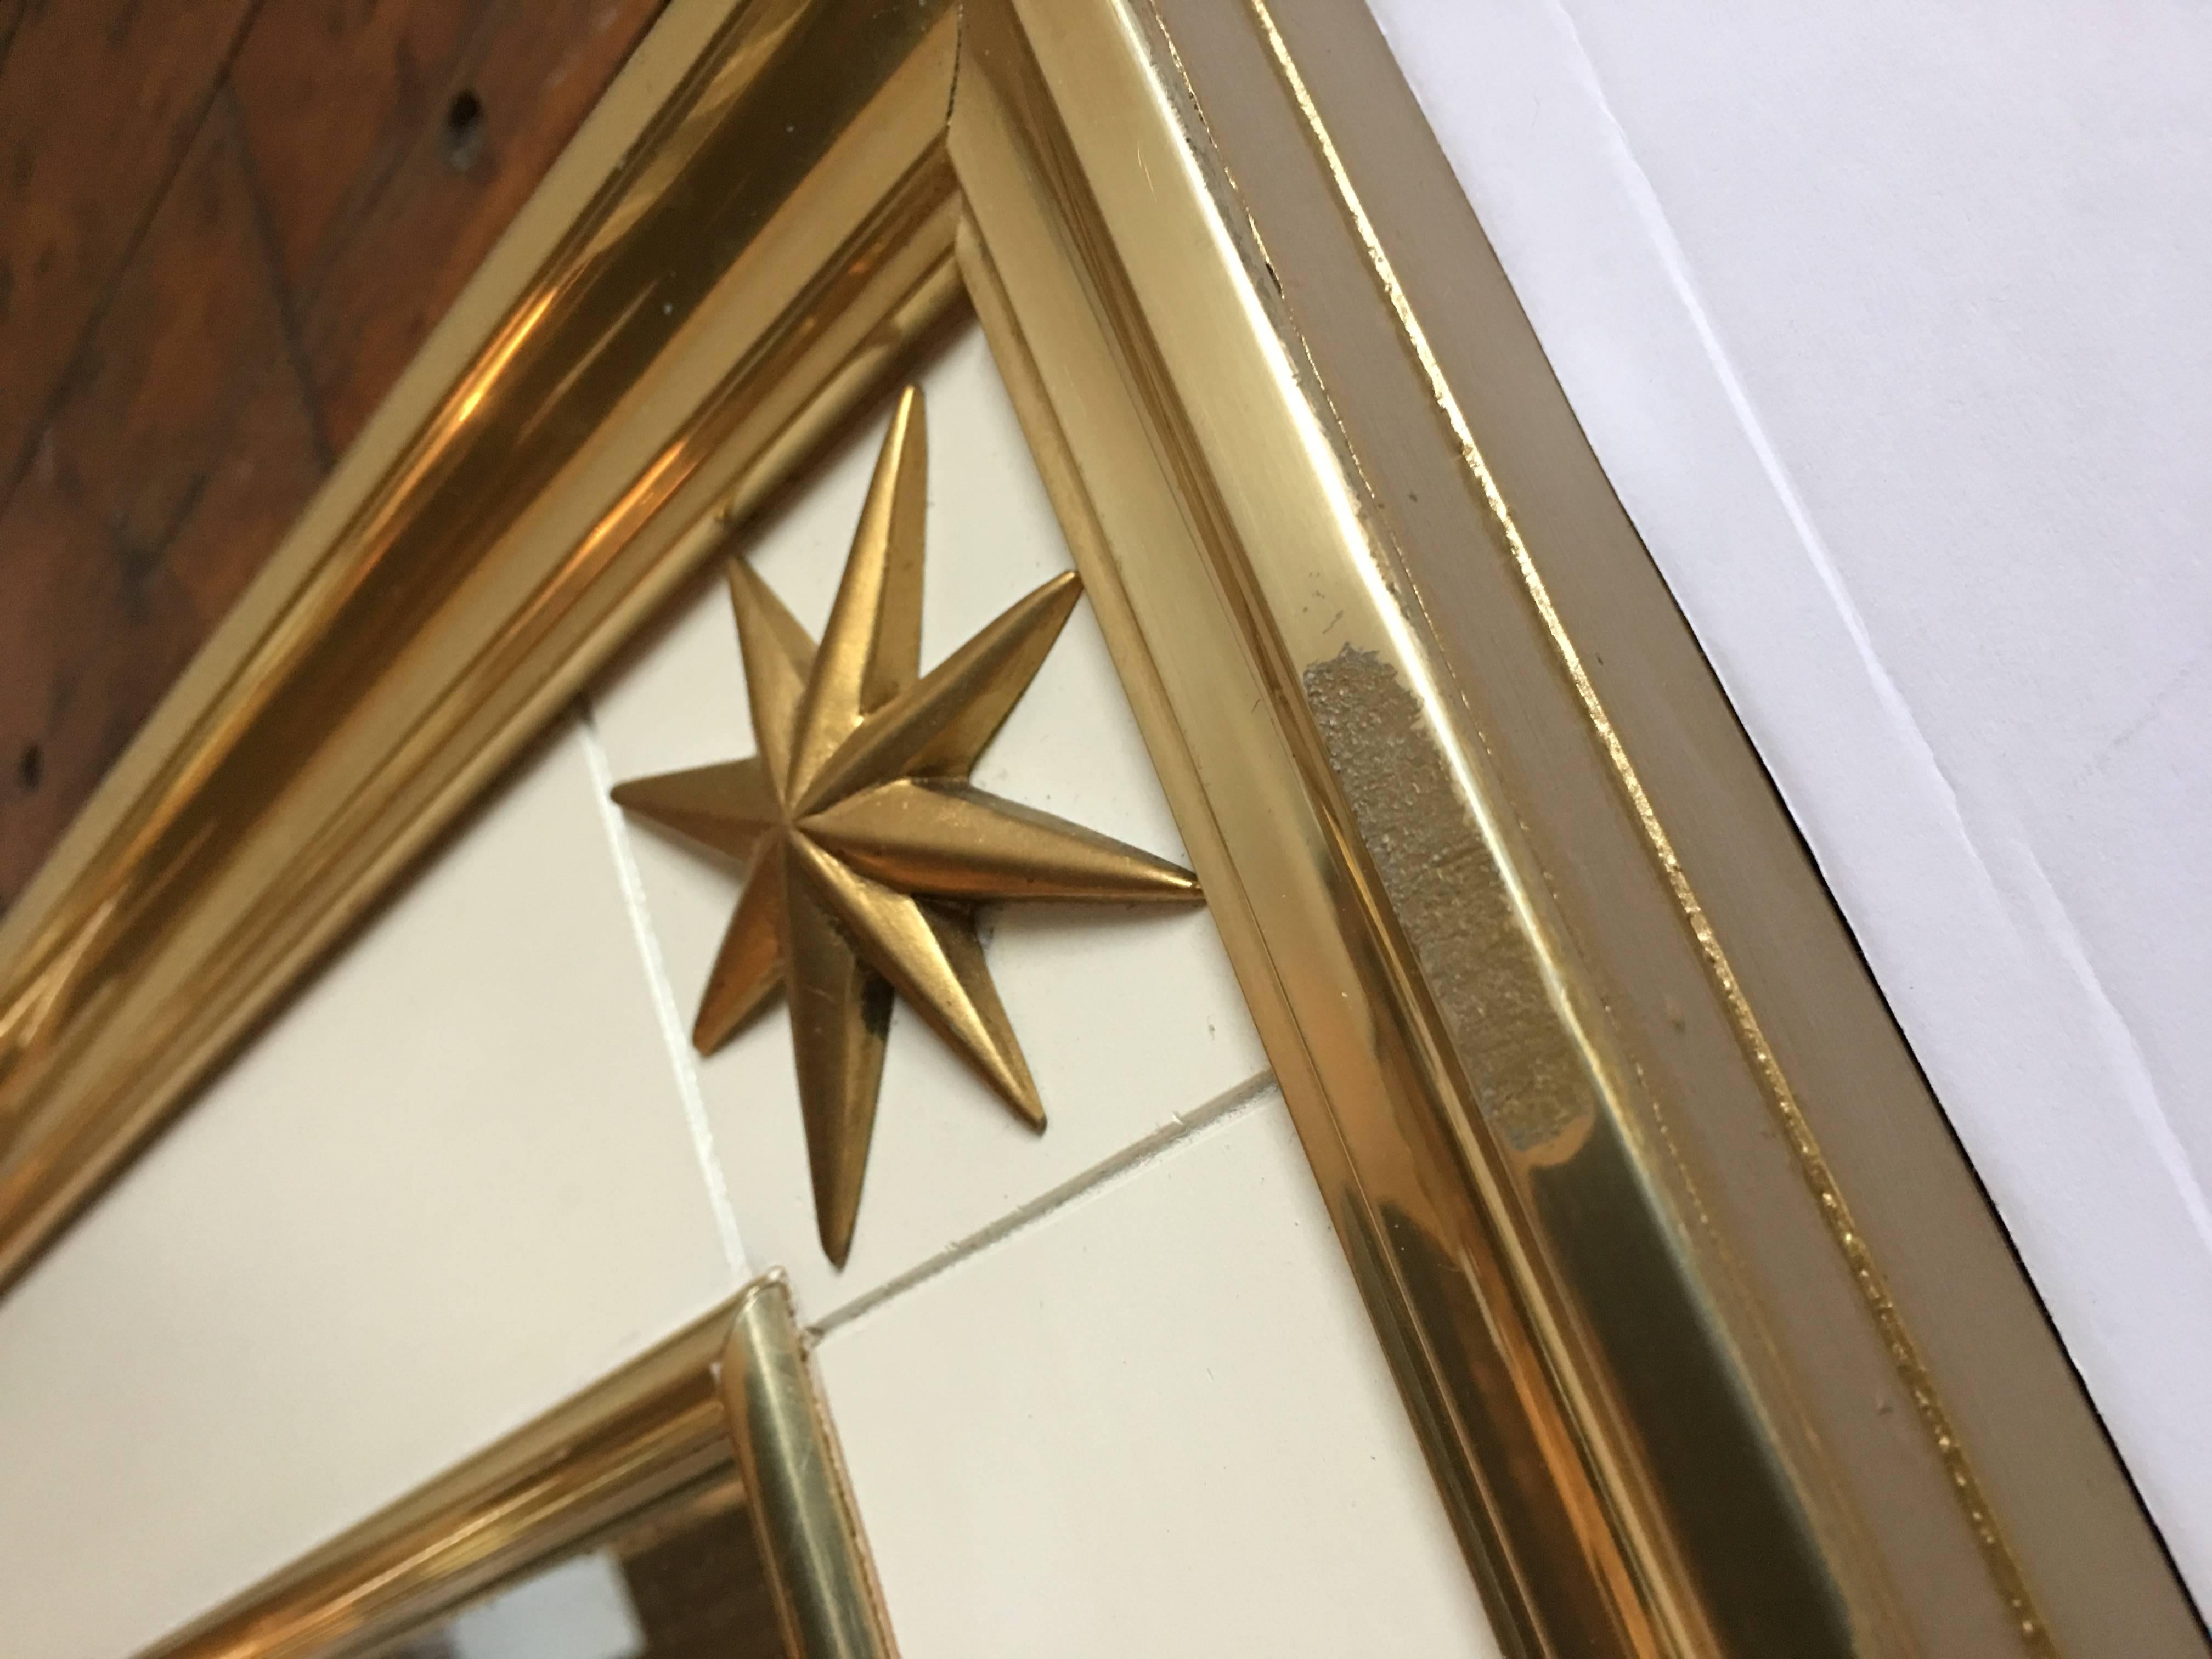 Large rectangular Mid-Century Modern brass metal wrapped mirror with decorative brass stars. This Neoclassical style mirror was designed by Renzo Rutili for Johnson Furniture Company.  Solid wood frame features a cream painted finish and gold